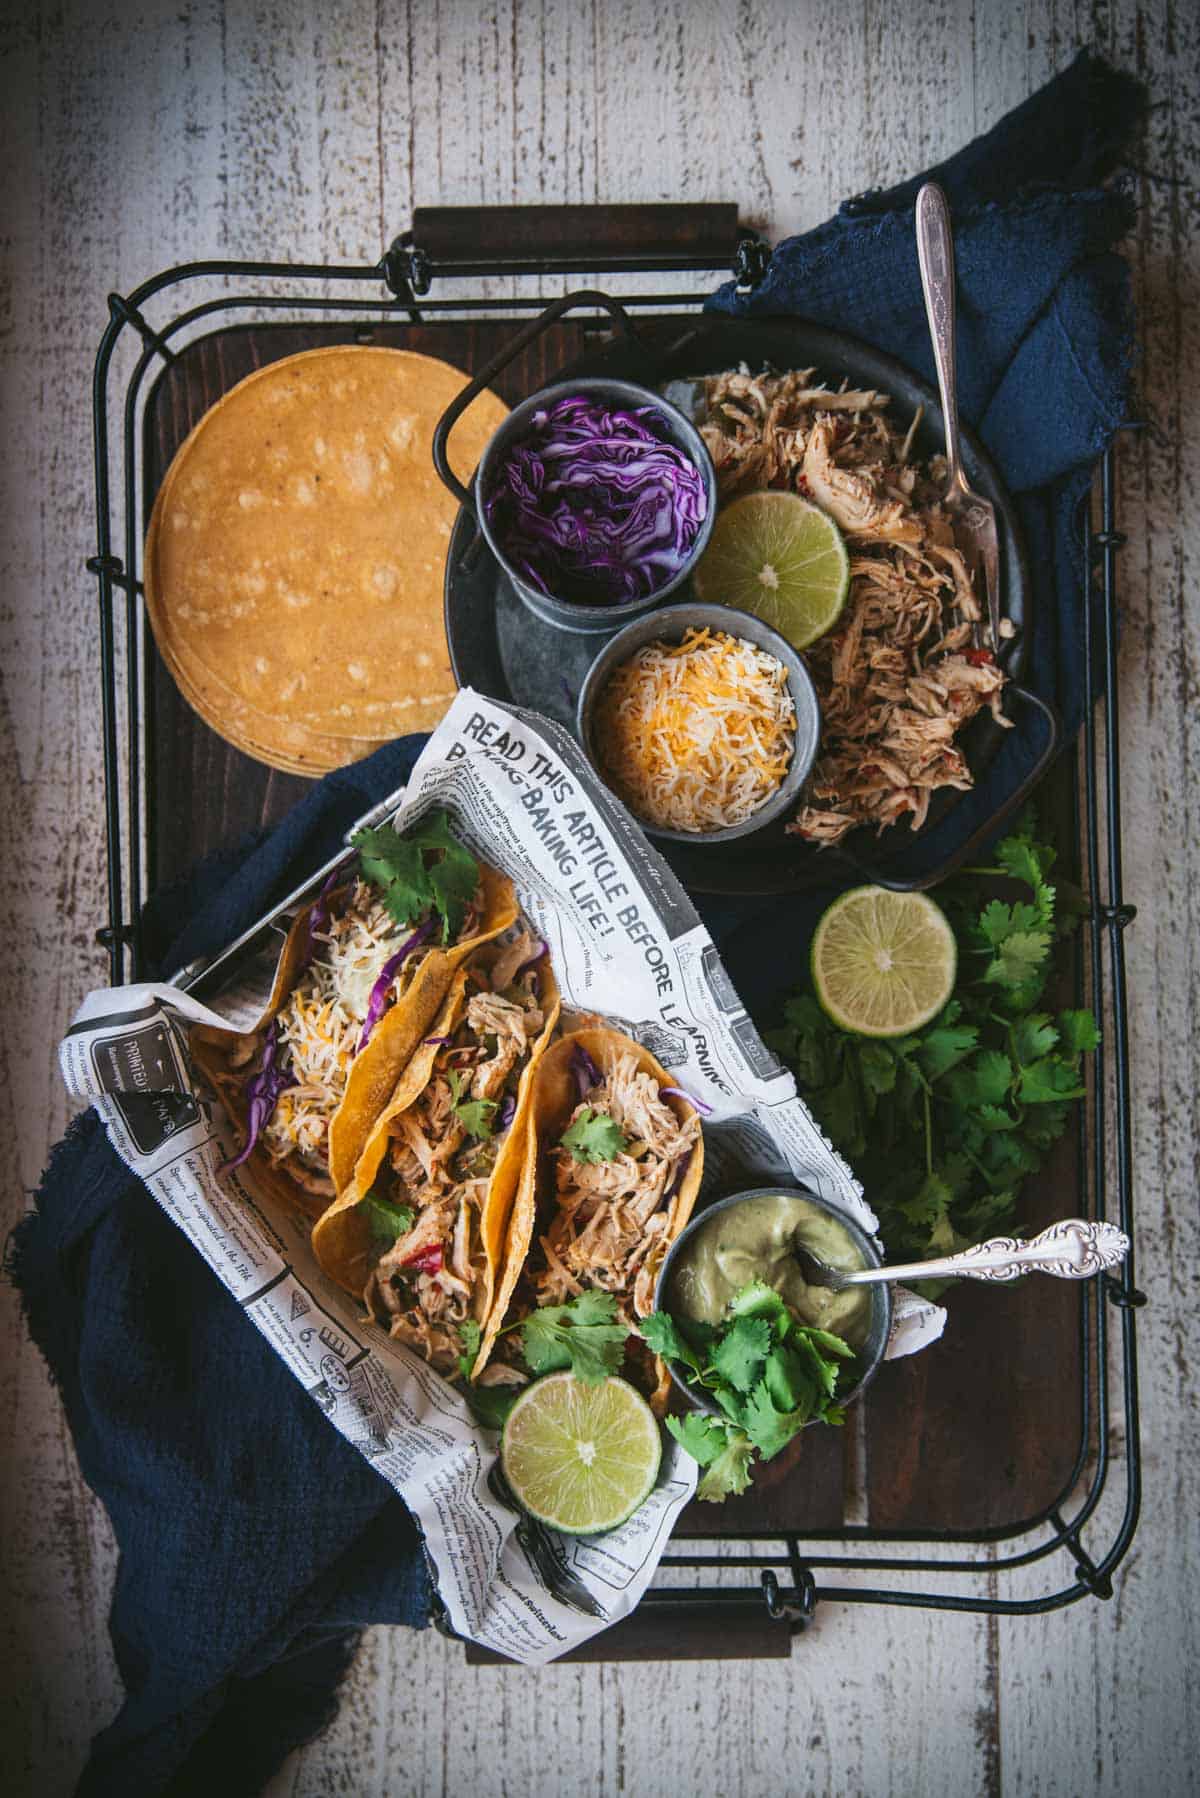 A large wooden tray with black metal handles is laid out with all the tacos and toppings. There is a newspaper lined box containing 3 chicken tacos topped with red cabbage, cheese and cilantro. Inside the box, next to the tacos is a a lime half and a small black ramekin dish filled with guacamole with a silver spoon in it. On the rest of the tray there is a black plate with more crock pot chicken on top, a lime ring, a black bowl of red cabbage and a dark colored bowl filled with cheese. Left over taco shells are piled on top of each other in the corner of the tray and extra cilantro and lime is scattered over the rest of the tray.